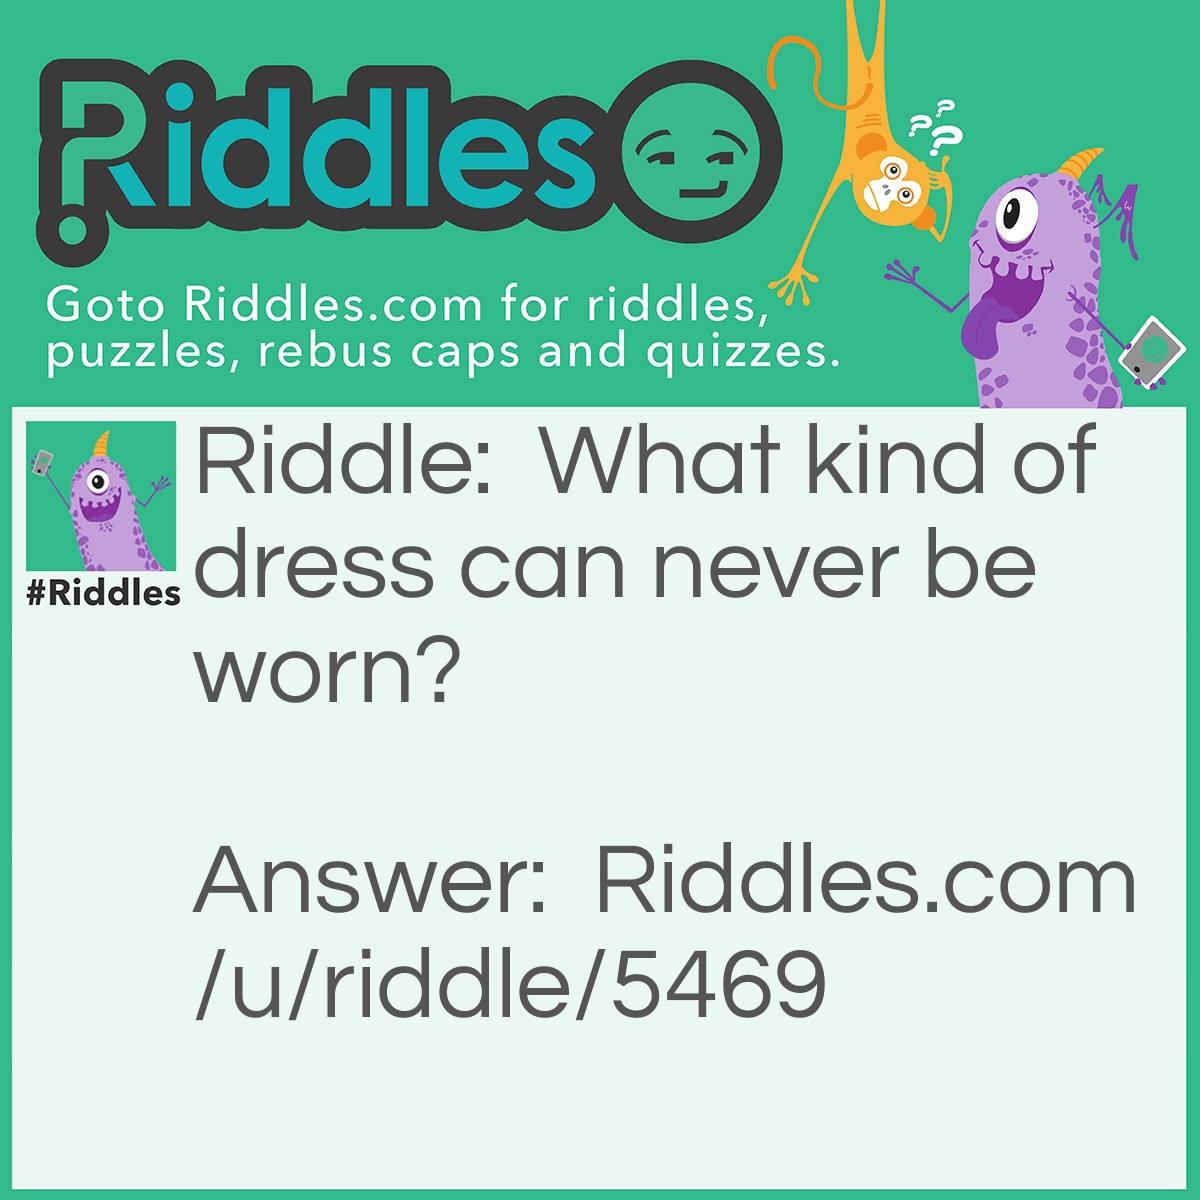 Riddle: What kind of dress can never be worn? Answer: Address.